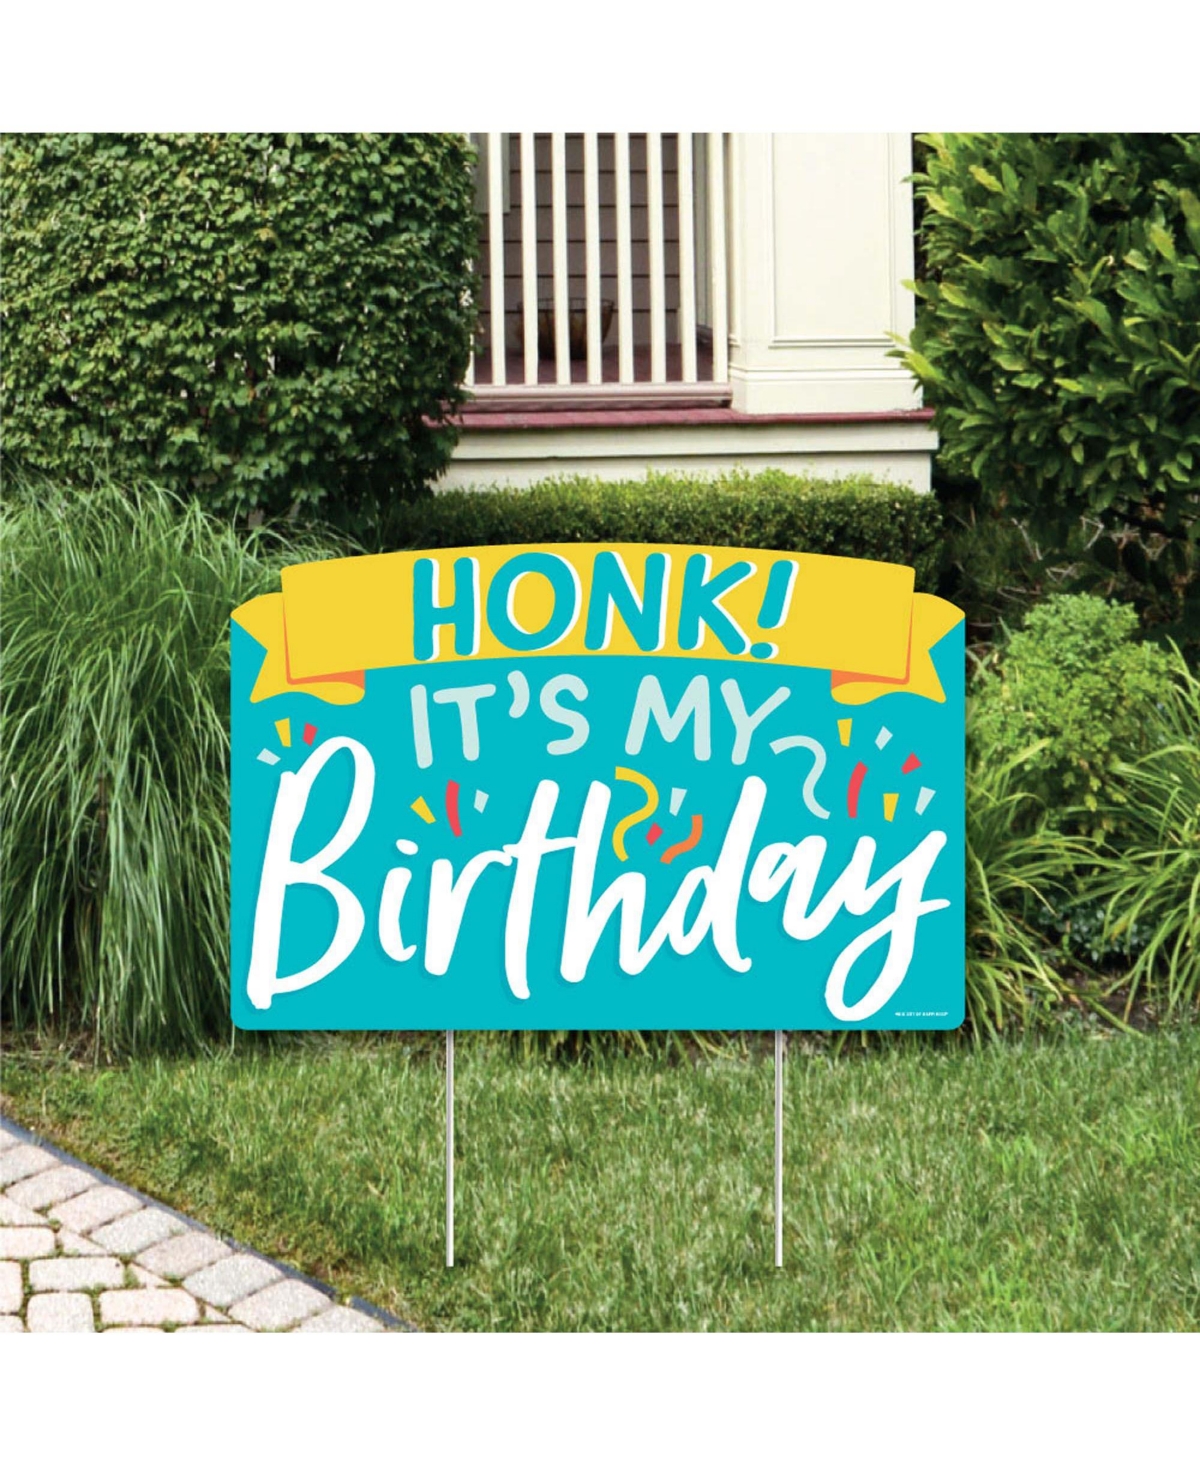 Honk, Its My Birthday - Birthday Party Yard Sign Lawn Decor - Party Yardy Sign